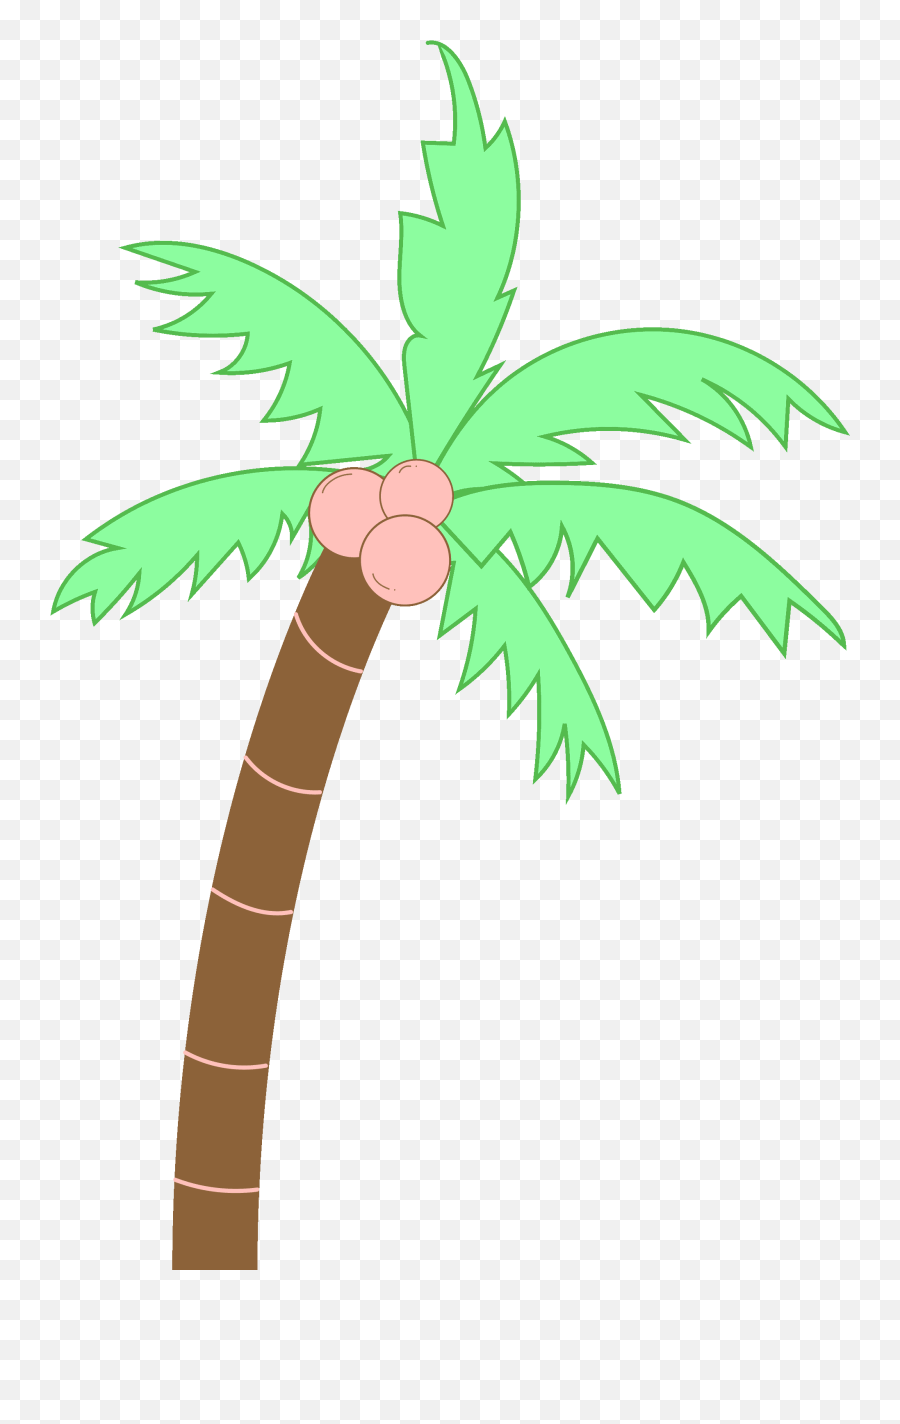 Latest Project How To Create Drag And Drop Activities With - Fresh Emoji,Palm Tree Emoji Iphone